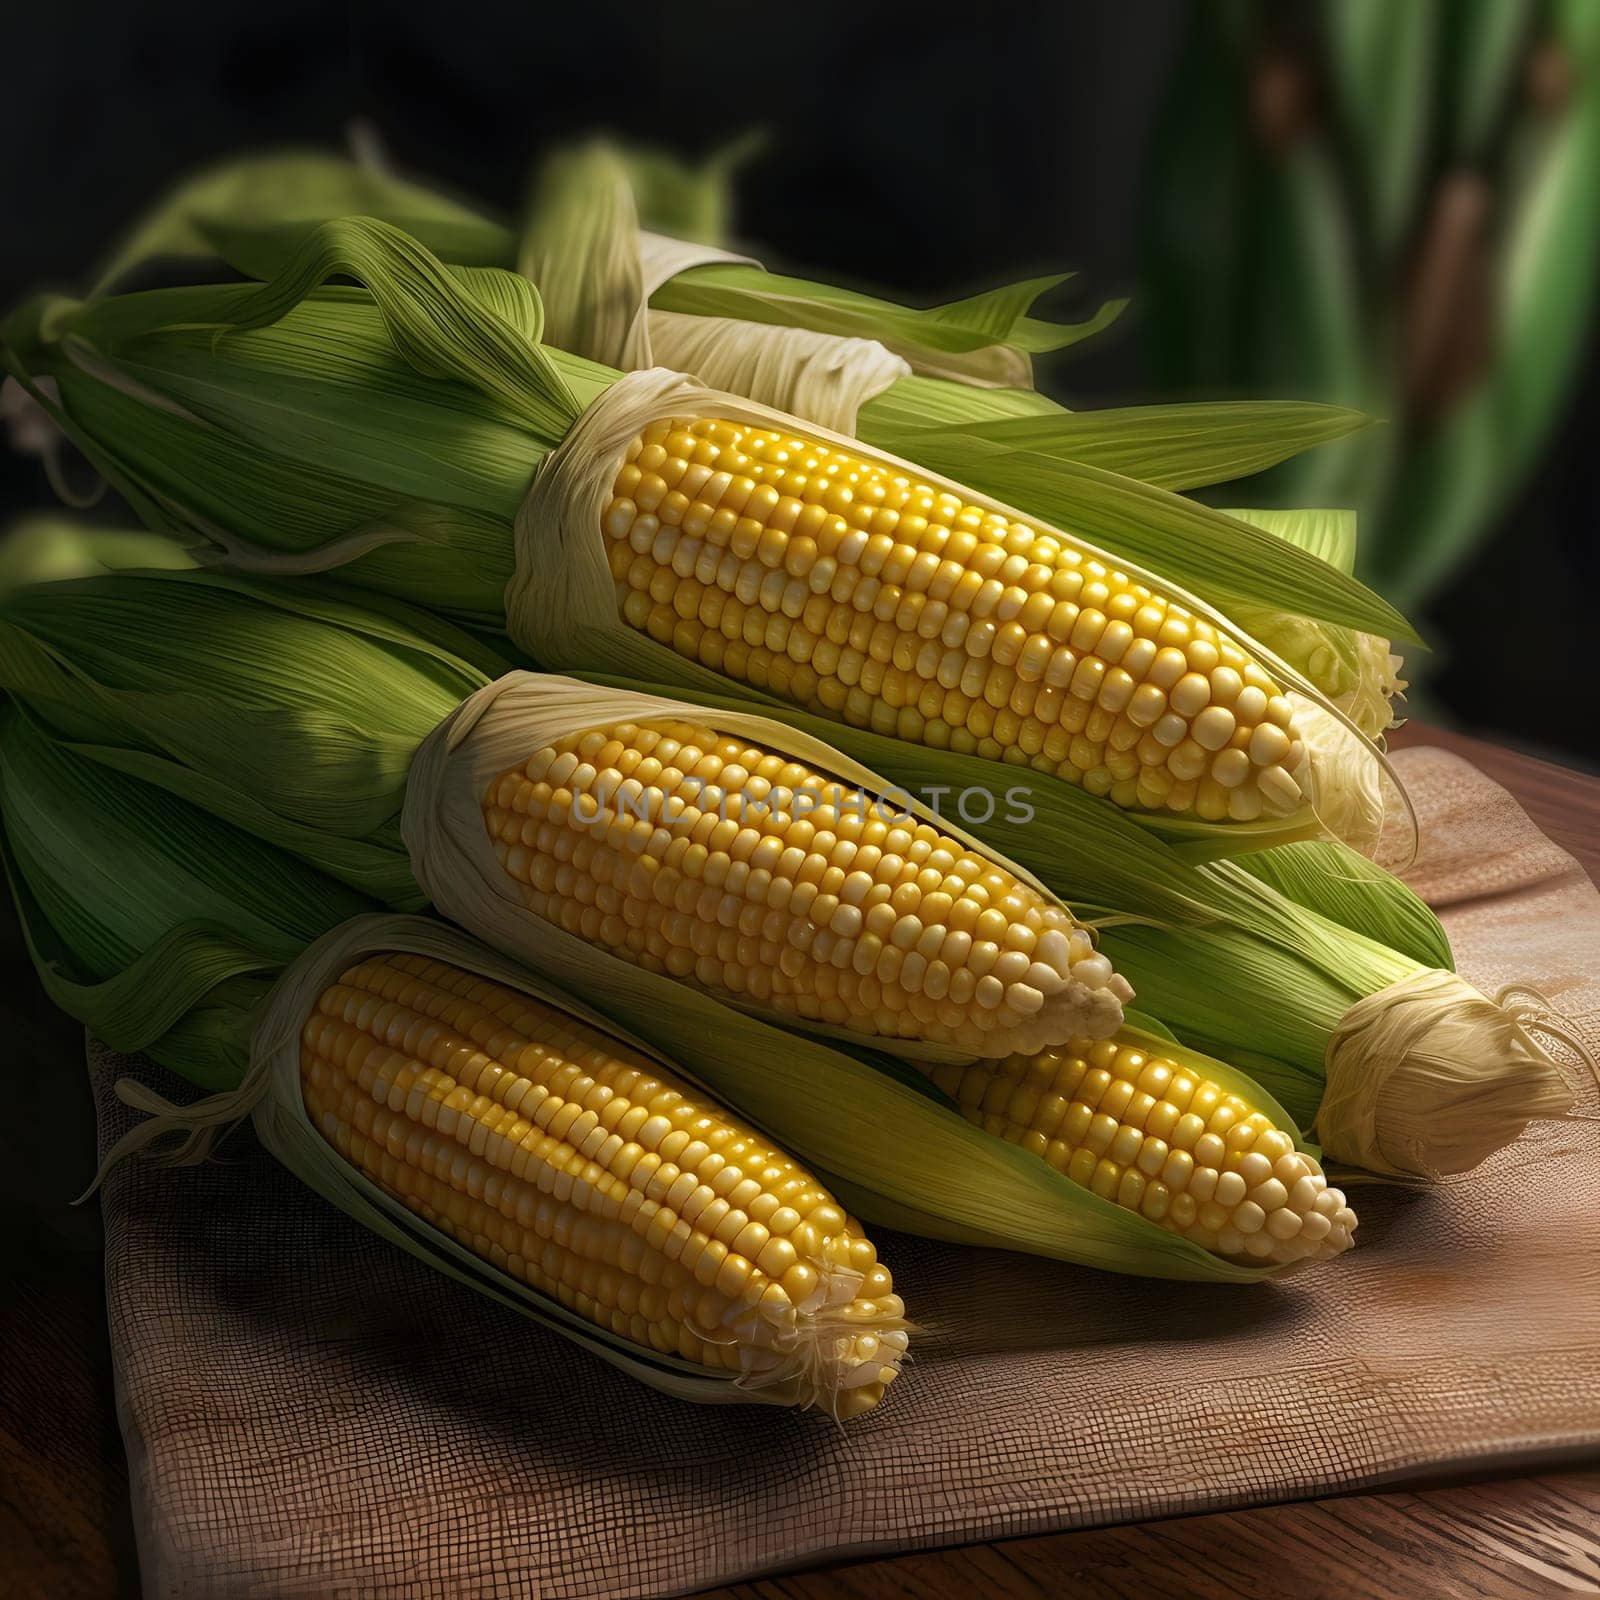 Yellow corn cobs with leaves on a fabric background. Corn as a dish of thanksgiving for the harvest. An atmosphere of joy and celebration.